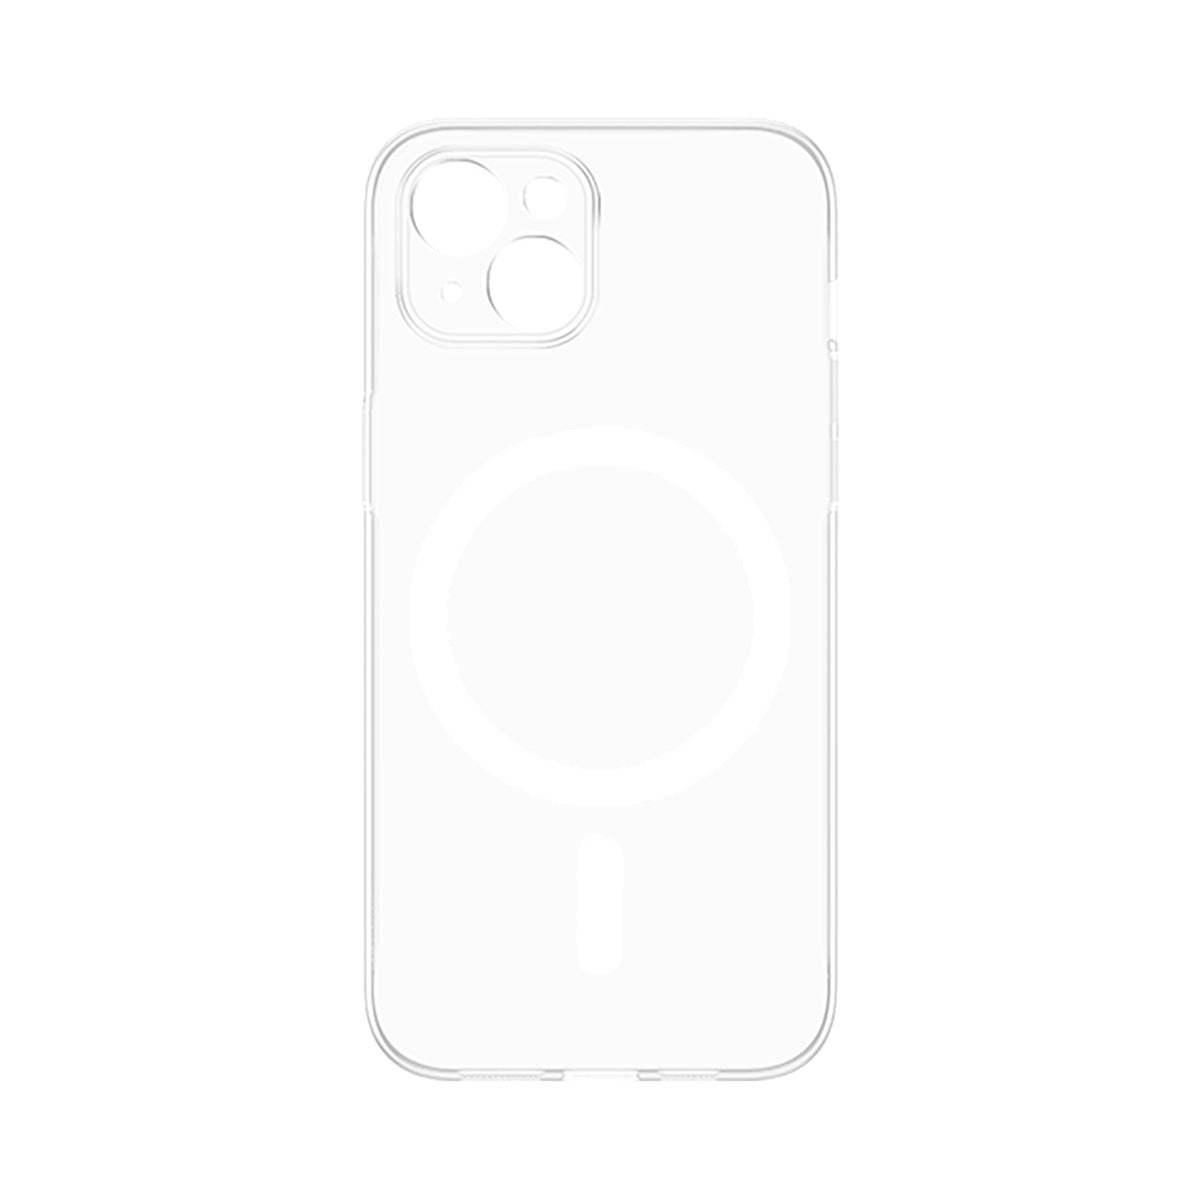 Baseus Lucent Magnetic Series Transparent Case for iPhone